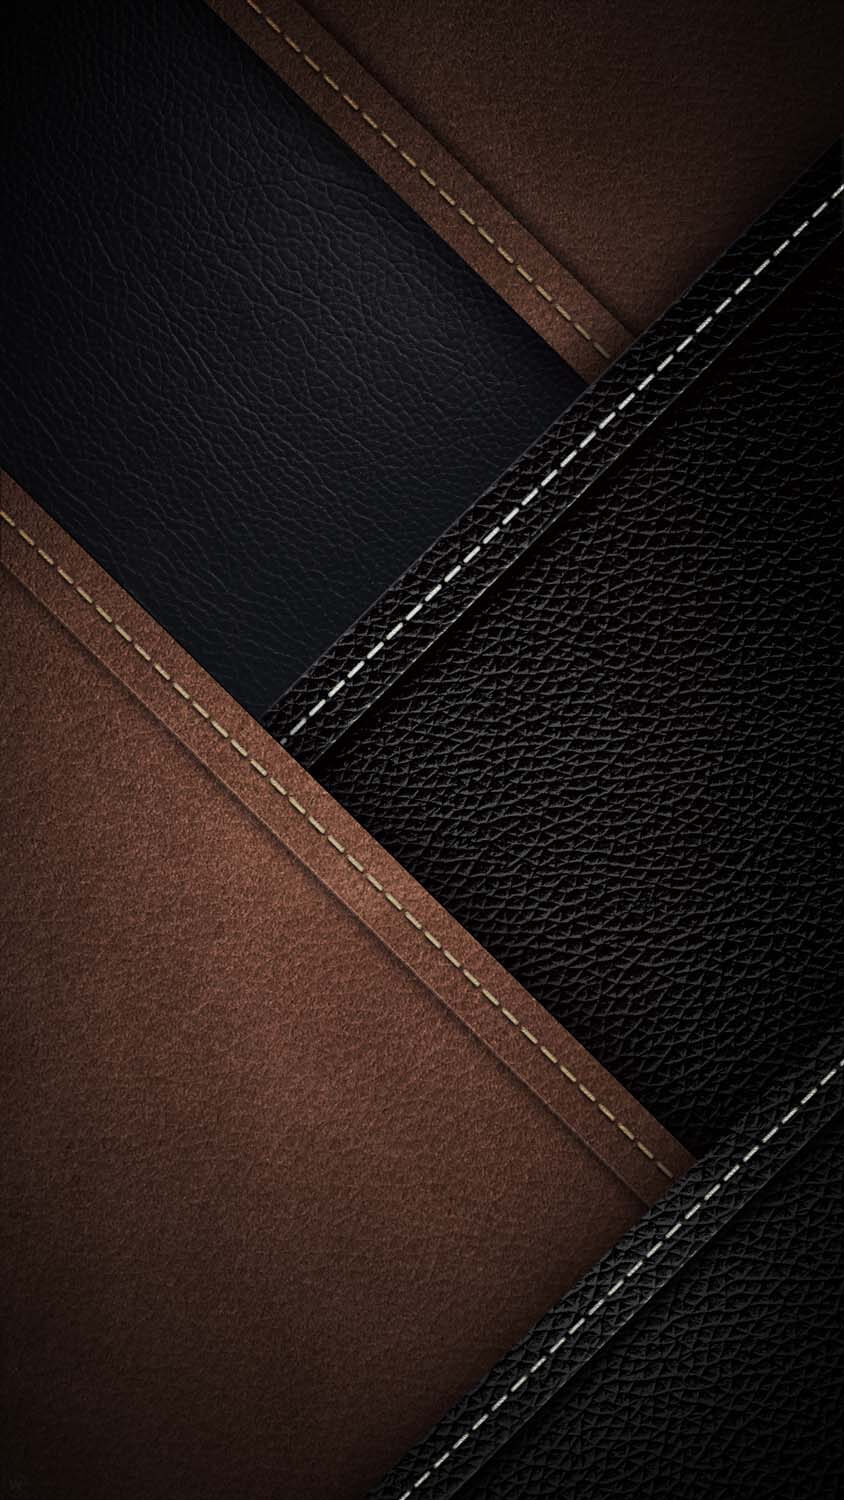 Leather Texture iPhone Wallpaper HD